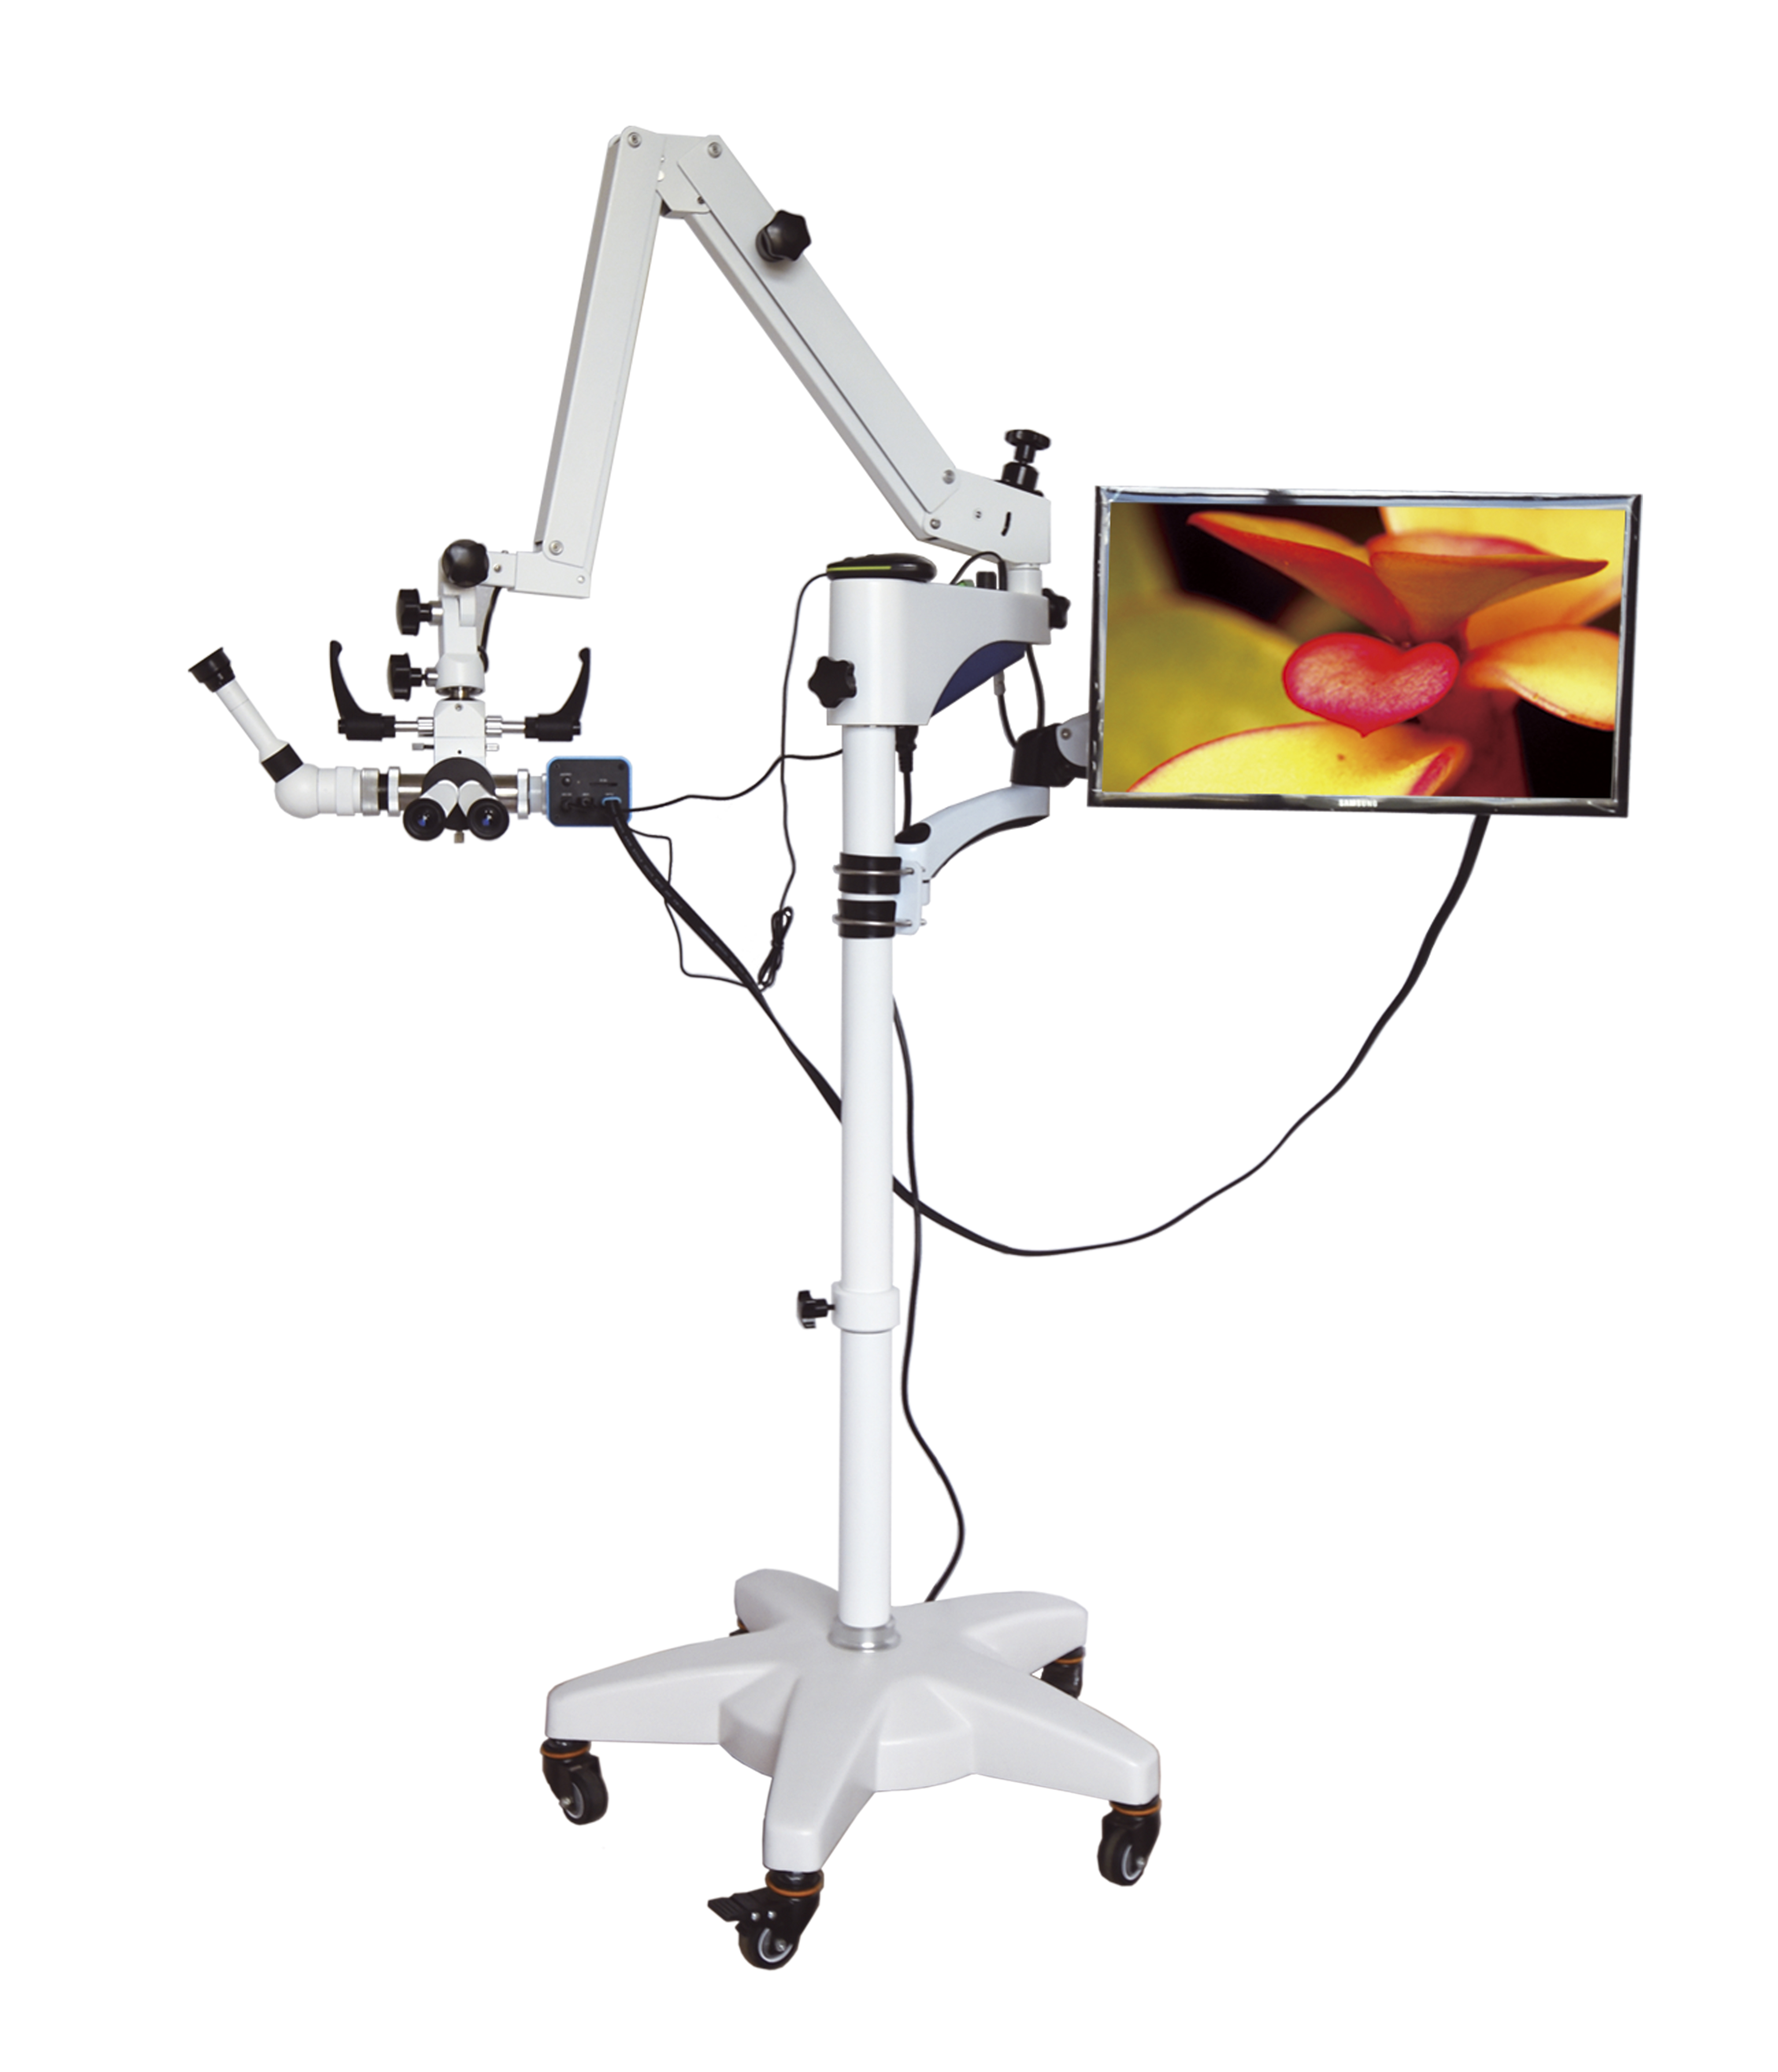 ENT Operating Microscope (FD-A101 Series)